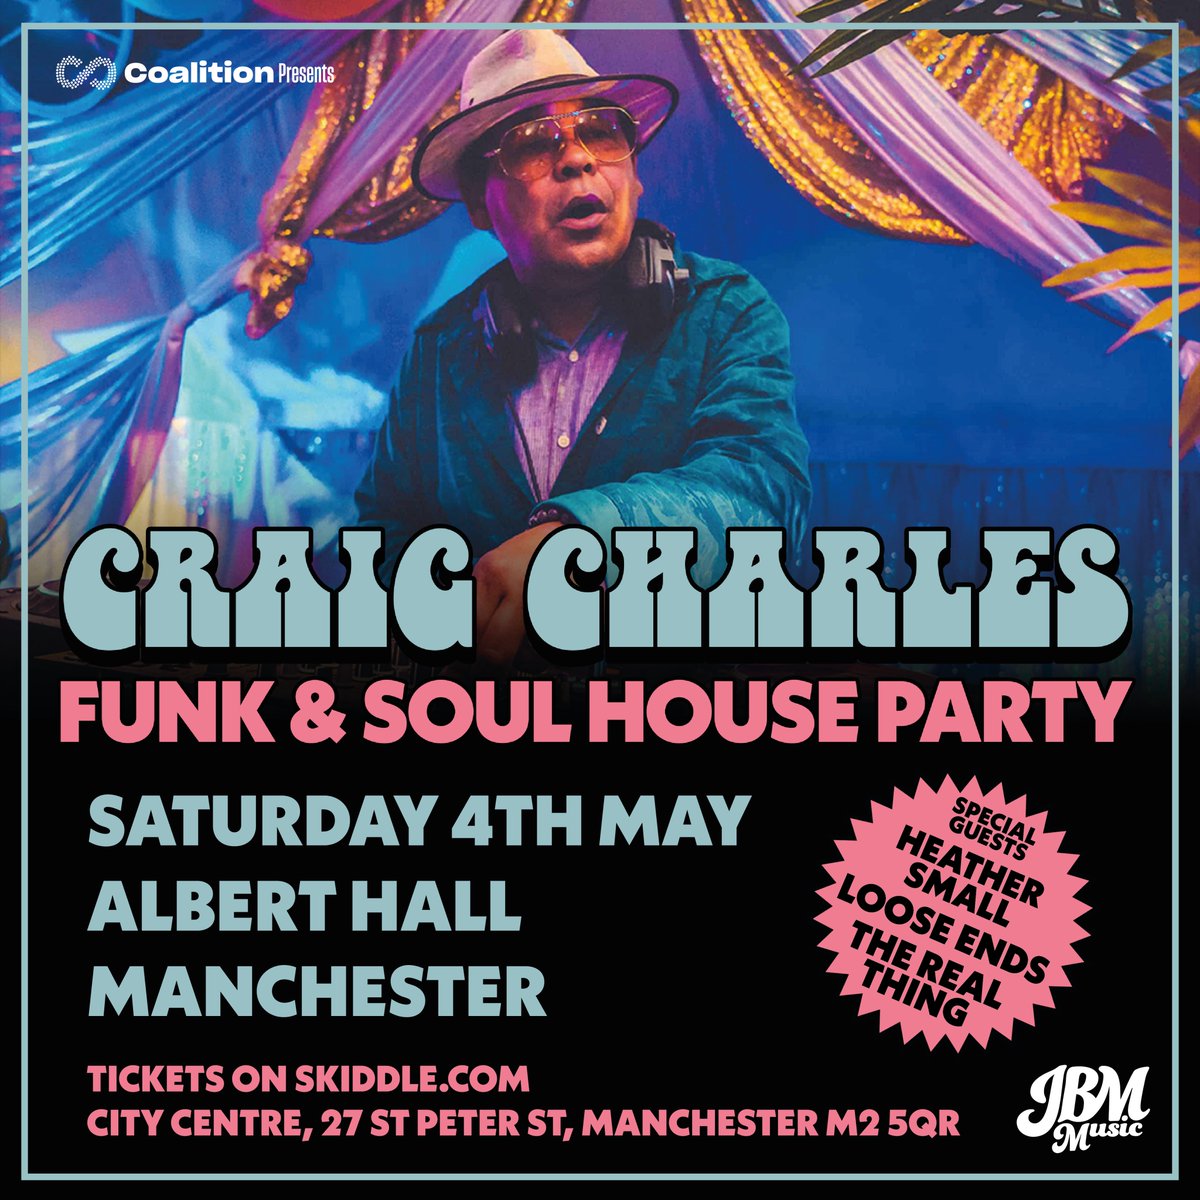 3 WEEKS TO GO: Following a sell-out success last year, @CCfunkandsoul is returning to our venue on Saturday the 4th of May, featuring a DJ set from the man himself, plus live performances from @MPeopleHeatherS, @realthinguk + @LooseEndsMusic! Tickets: tinyurl.com/eu7yu6yp